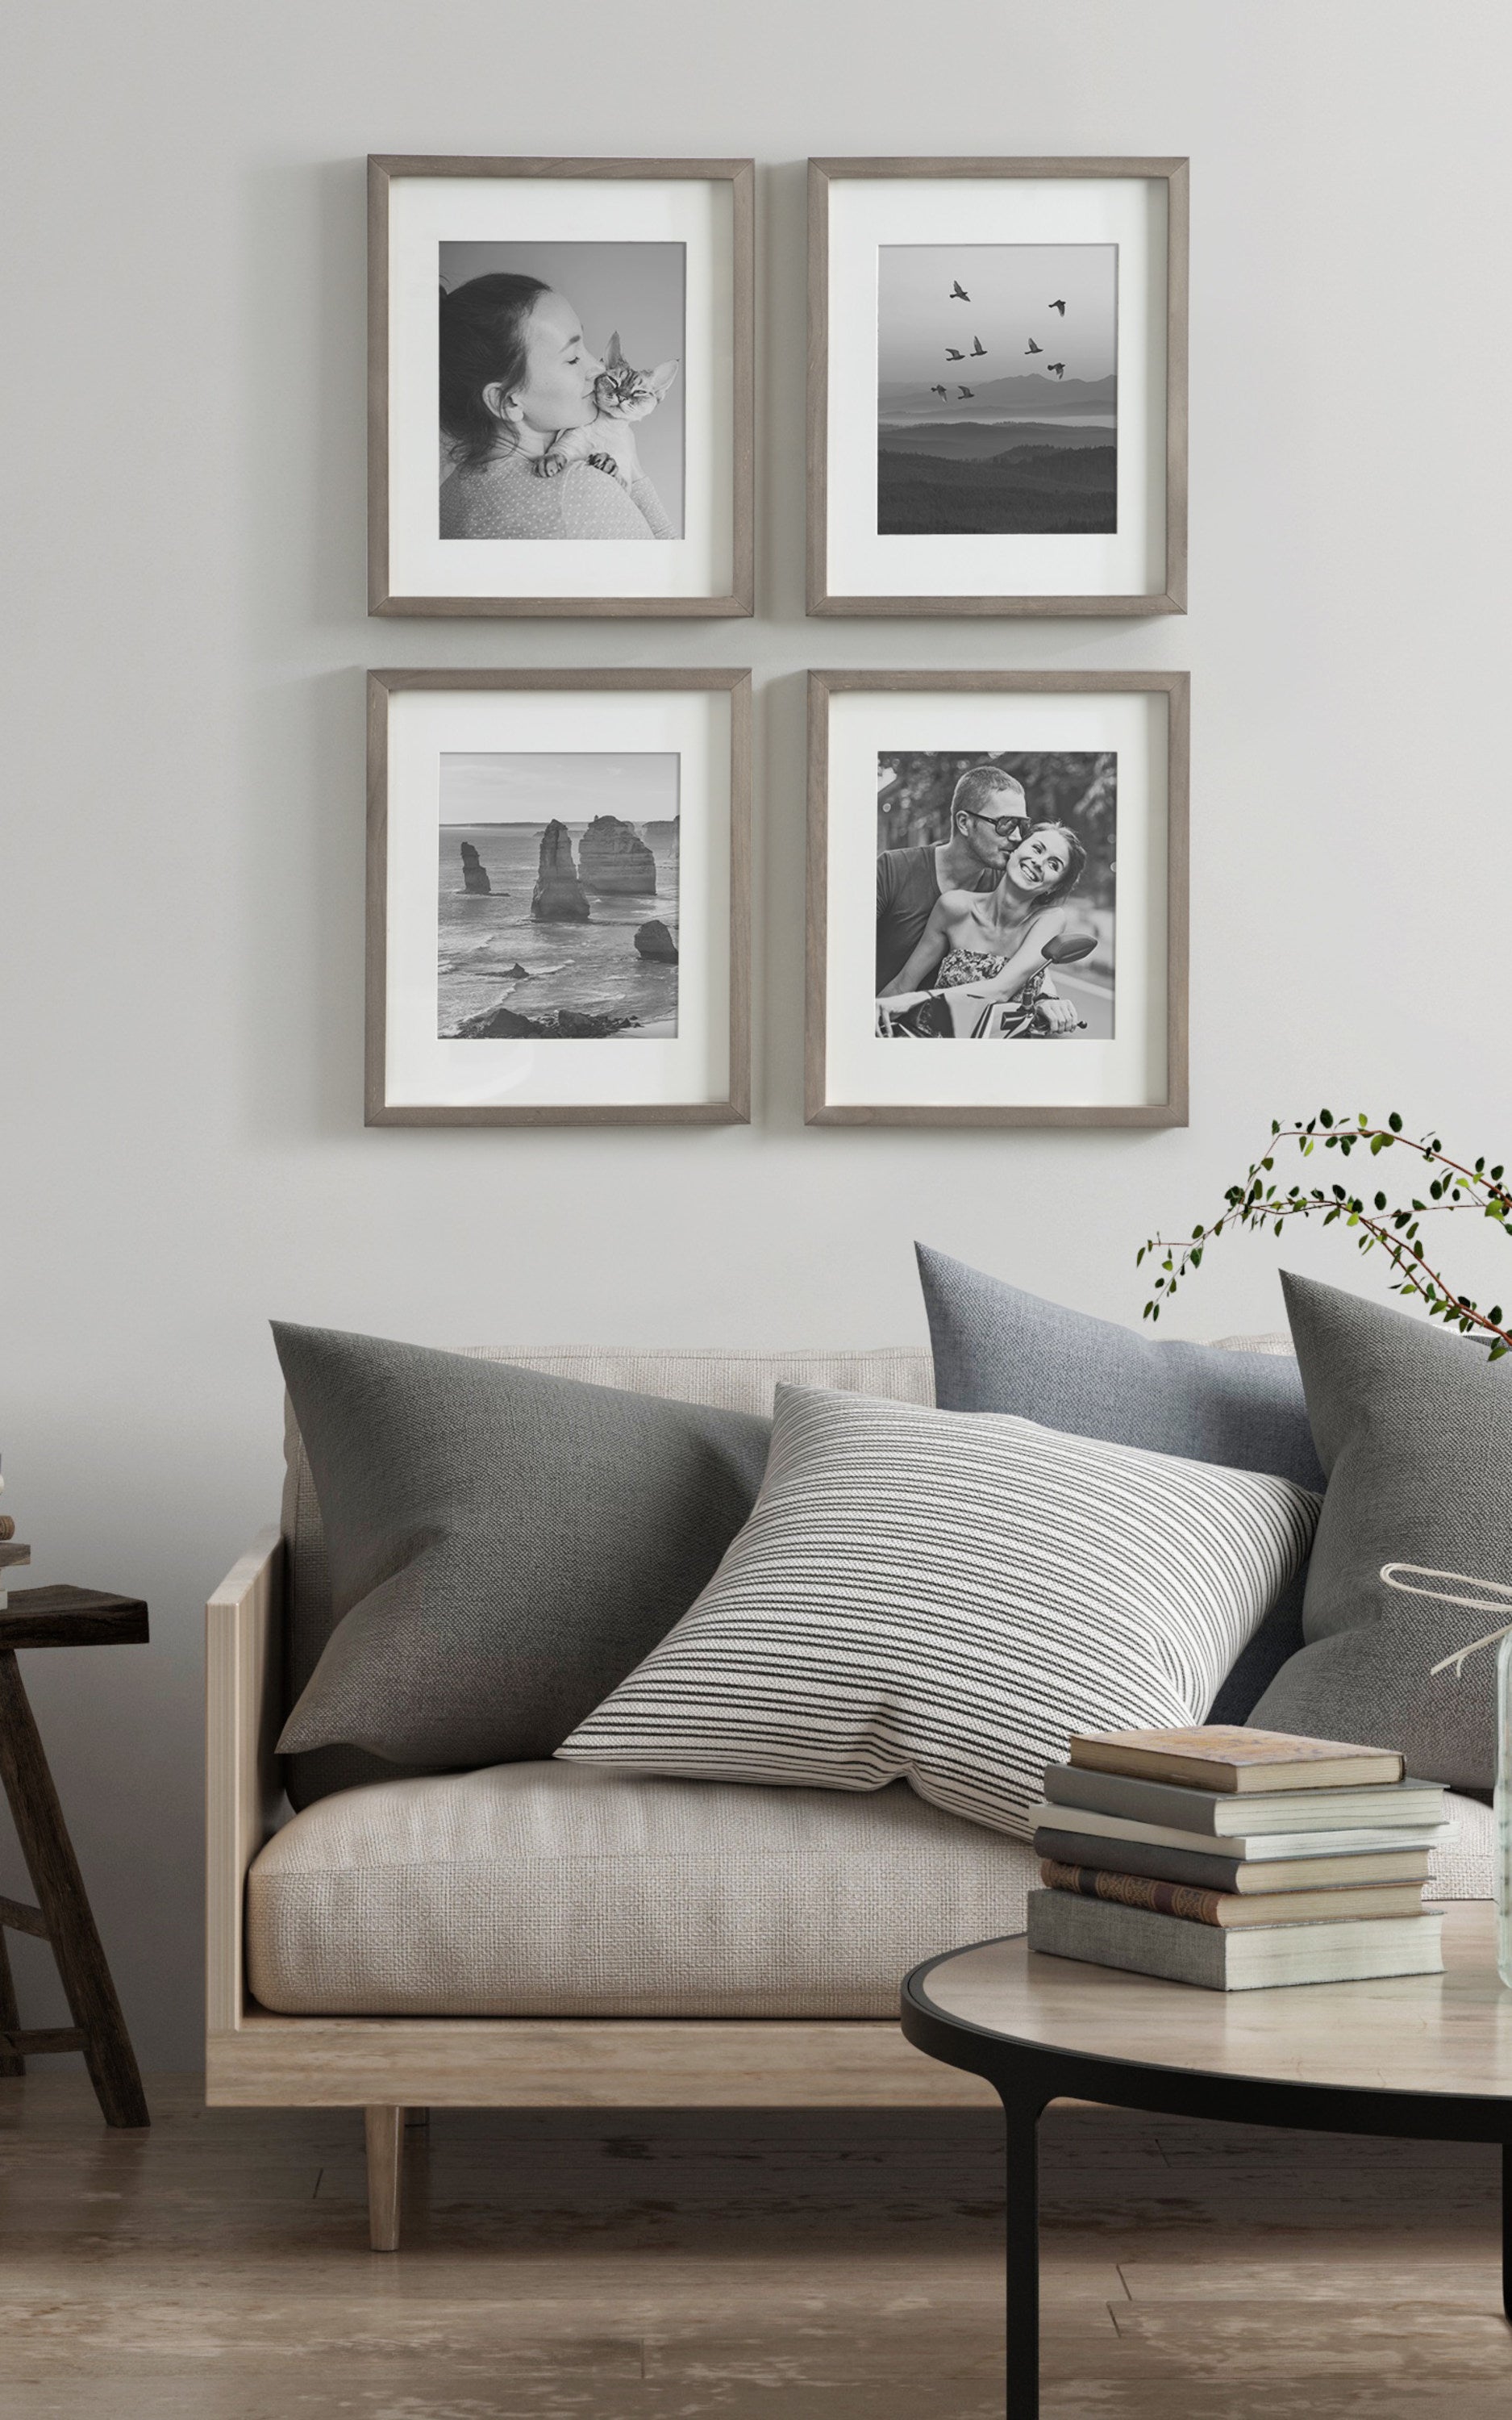 StyleWell 11 x 14 Matted to 8 x 10 Ash Gallery Wall Picture Frames (Set of 4), Grey